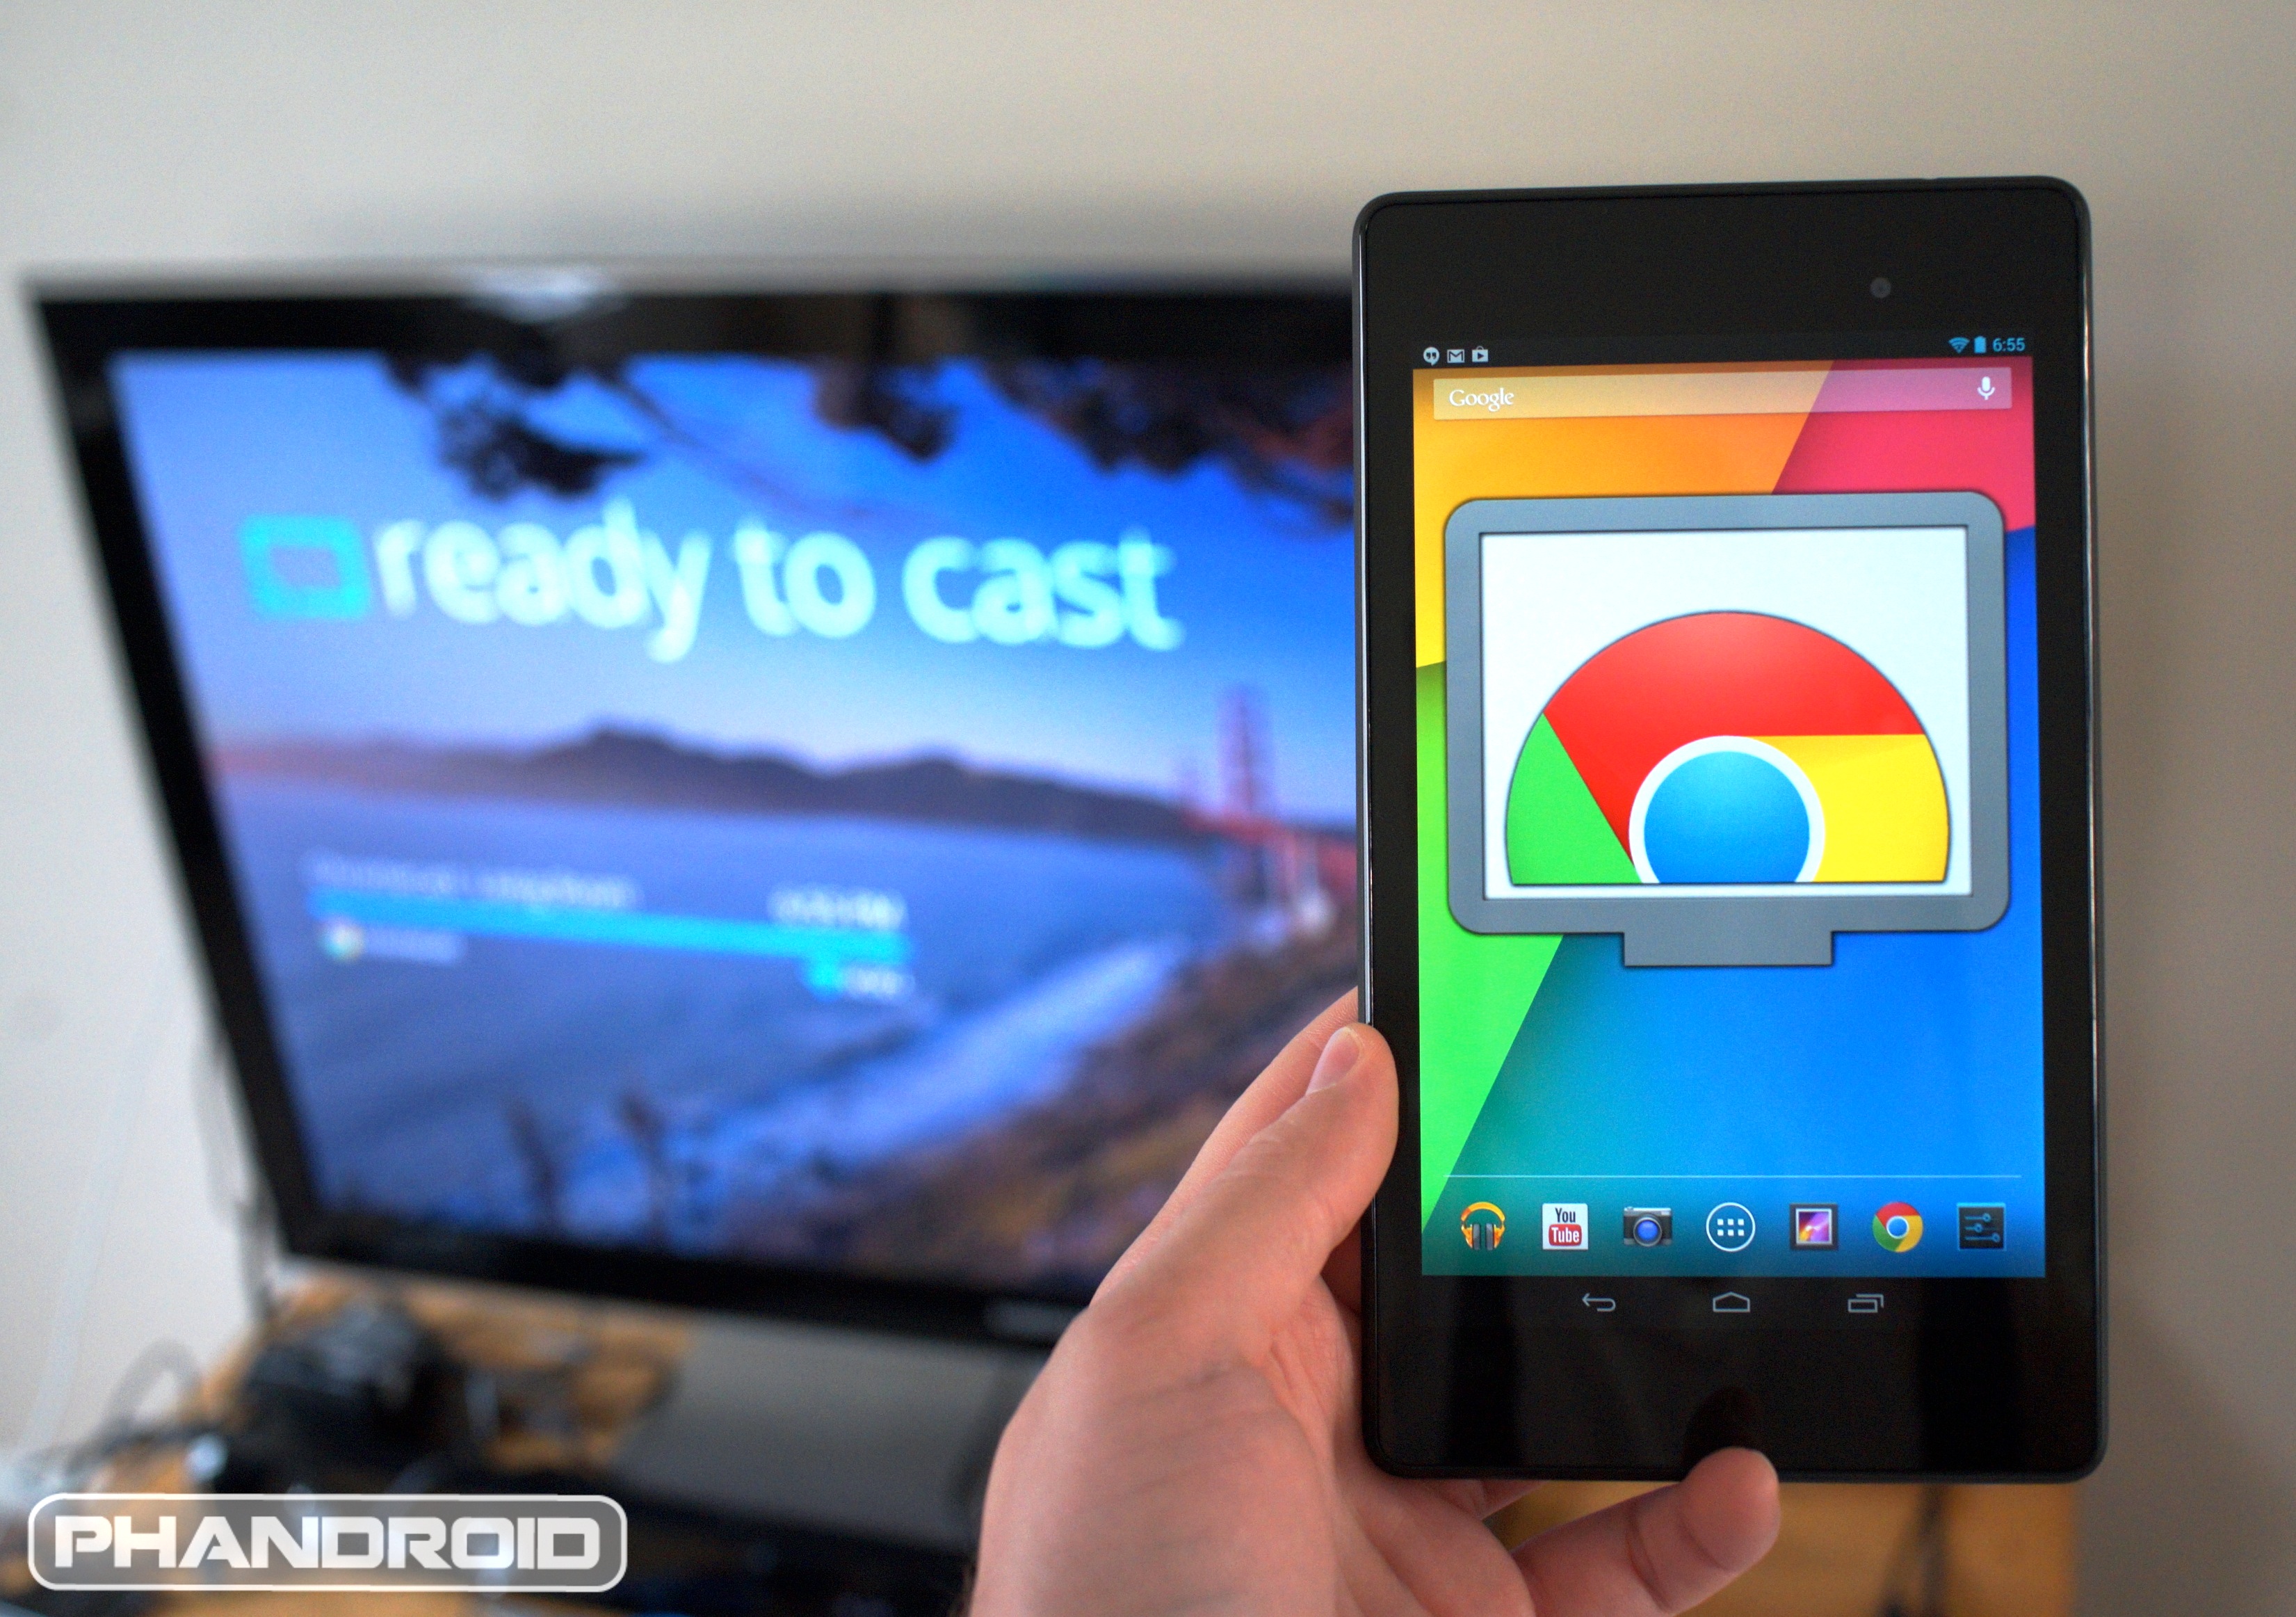 Google adds Monopoly, Angry Birds, Yahtzee and more to Chromecast the holiday season – Phandroid